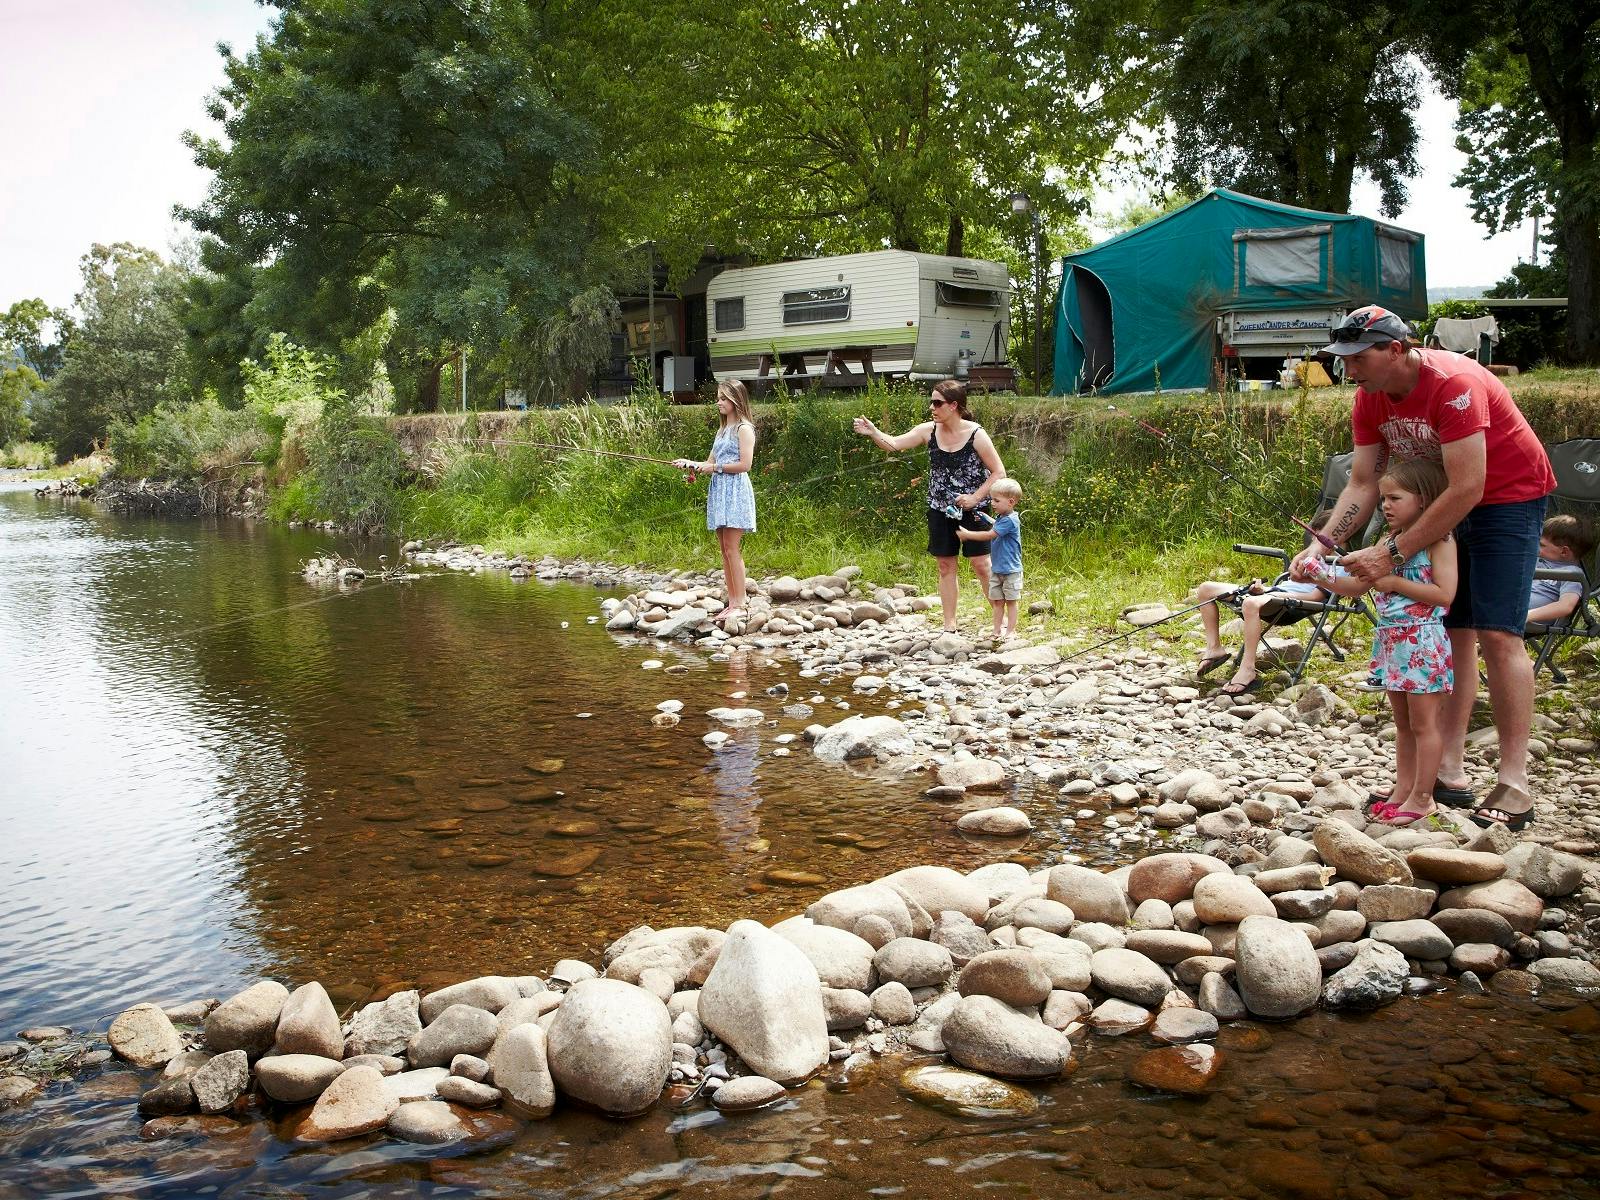 2 adults and 3 kids, fishing off the rocky bank by the river, caravans, tents, sunny day.